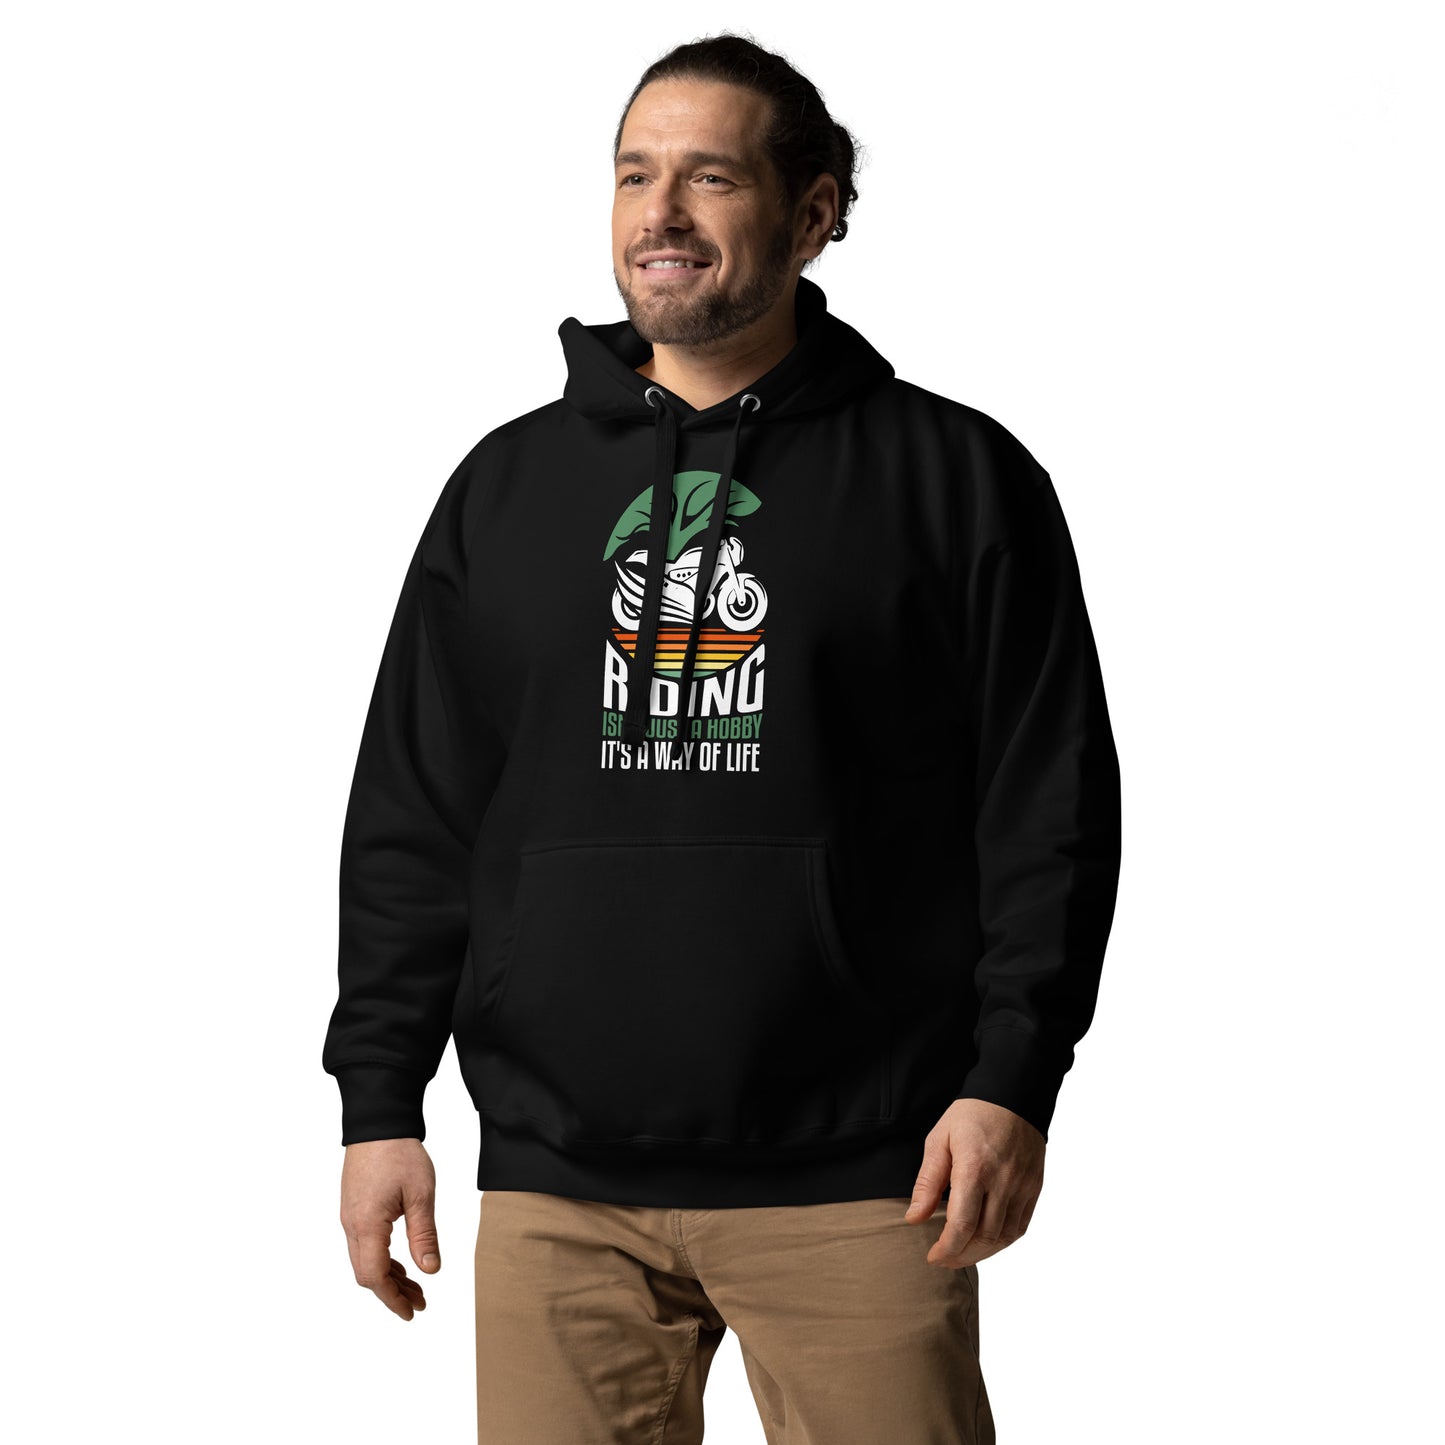 Riding isn't just a Hobby, it's a way of Life Hoodie